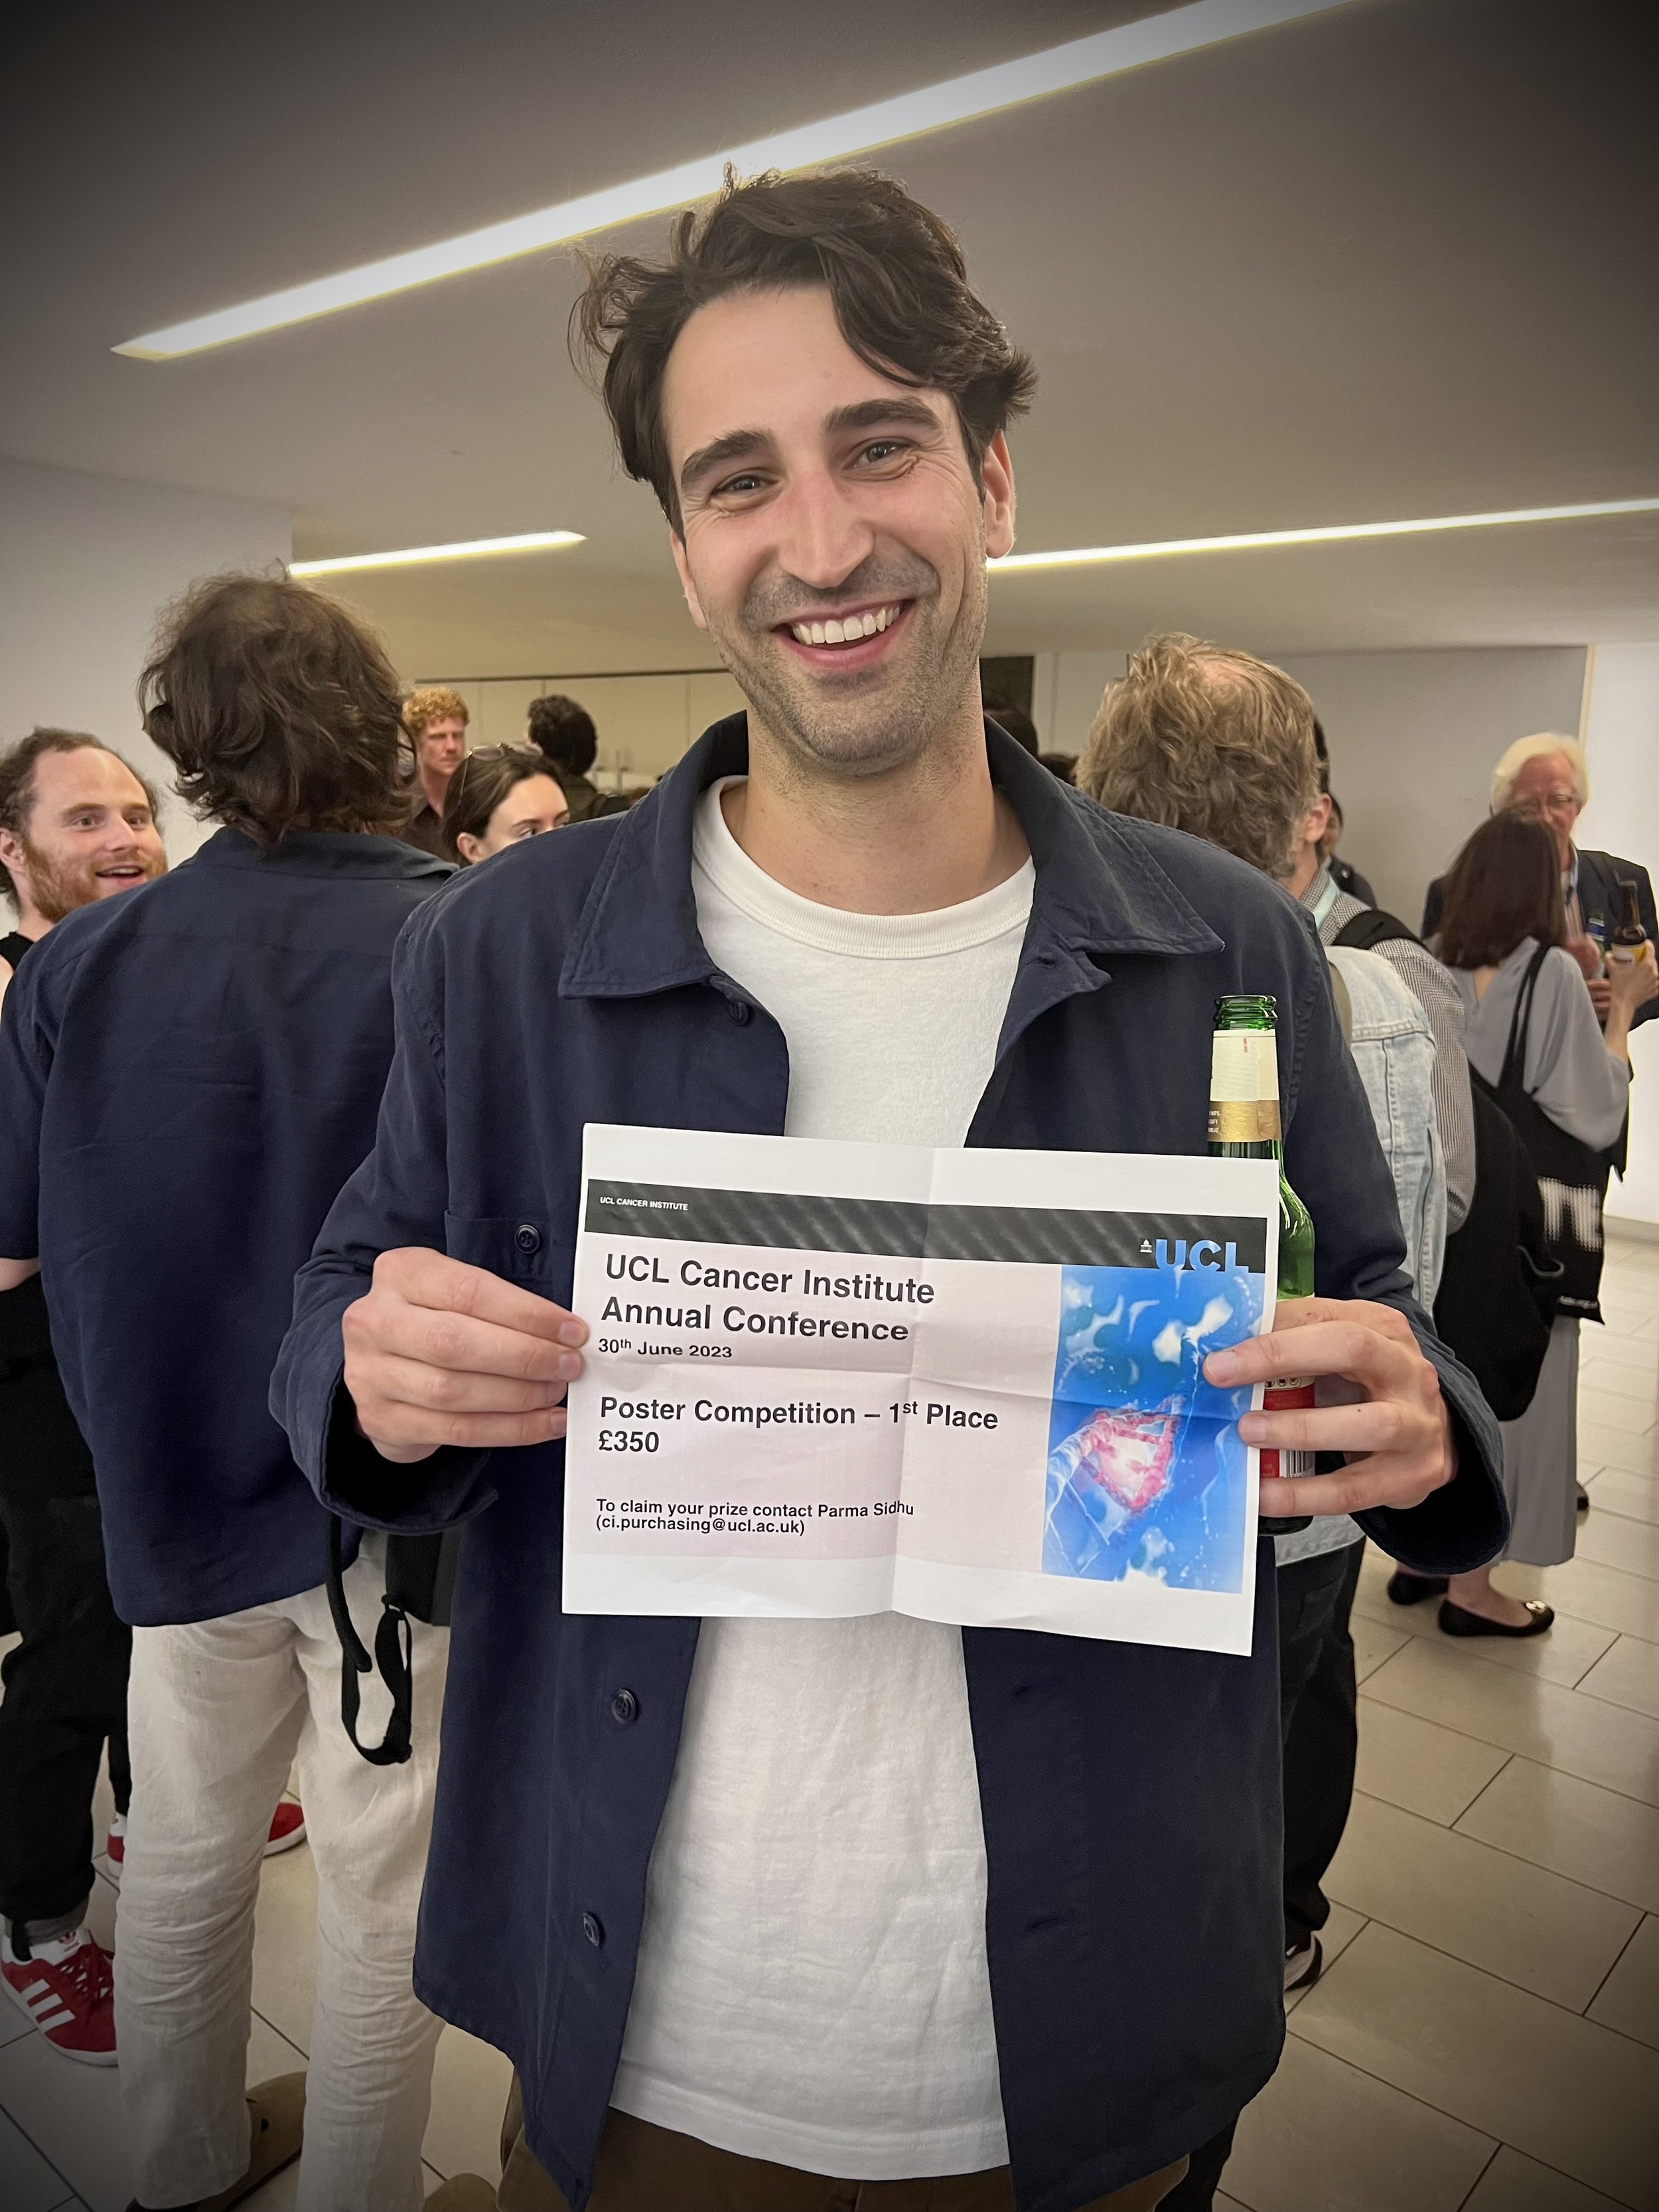  James wins 1st prize at the UCL Cancer Institute poster competition (Jun. 23) 